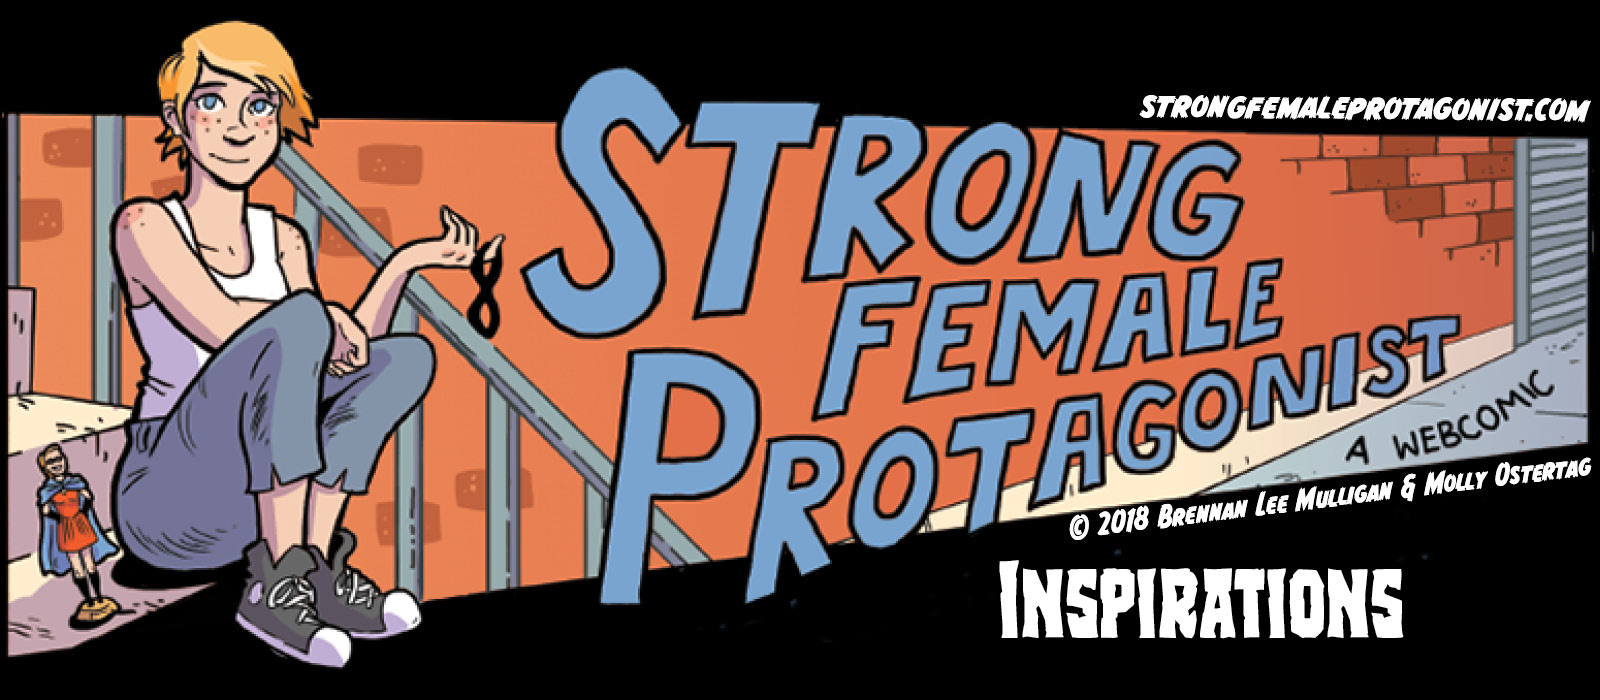 Strong Female Protagonist